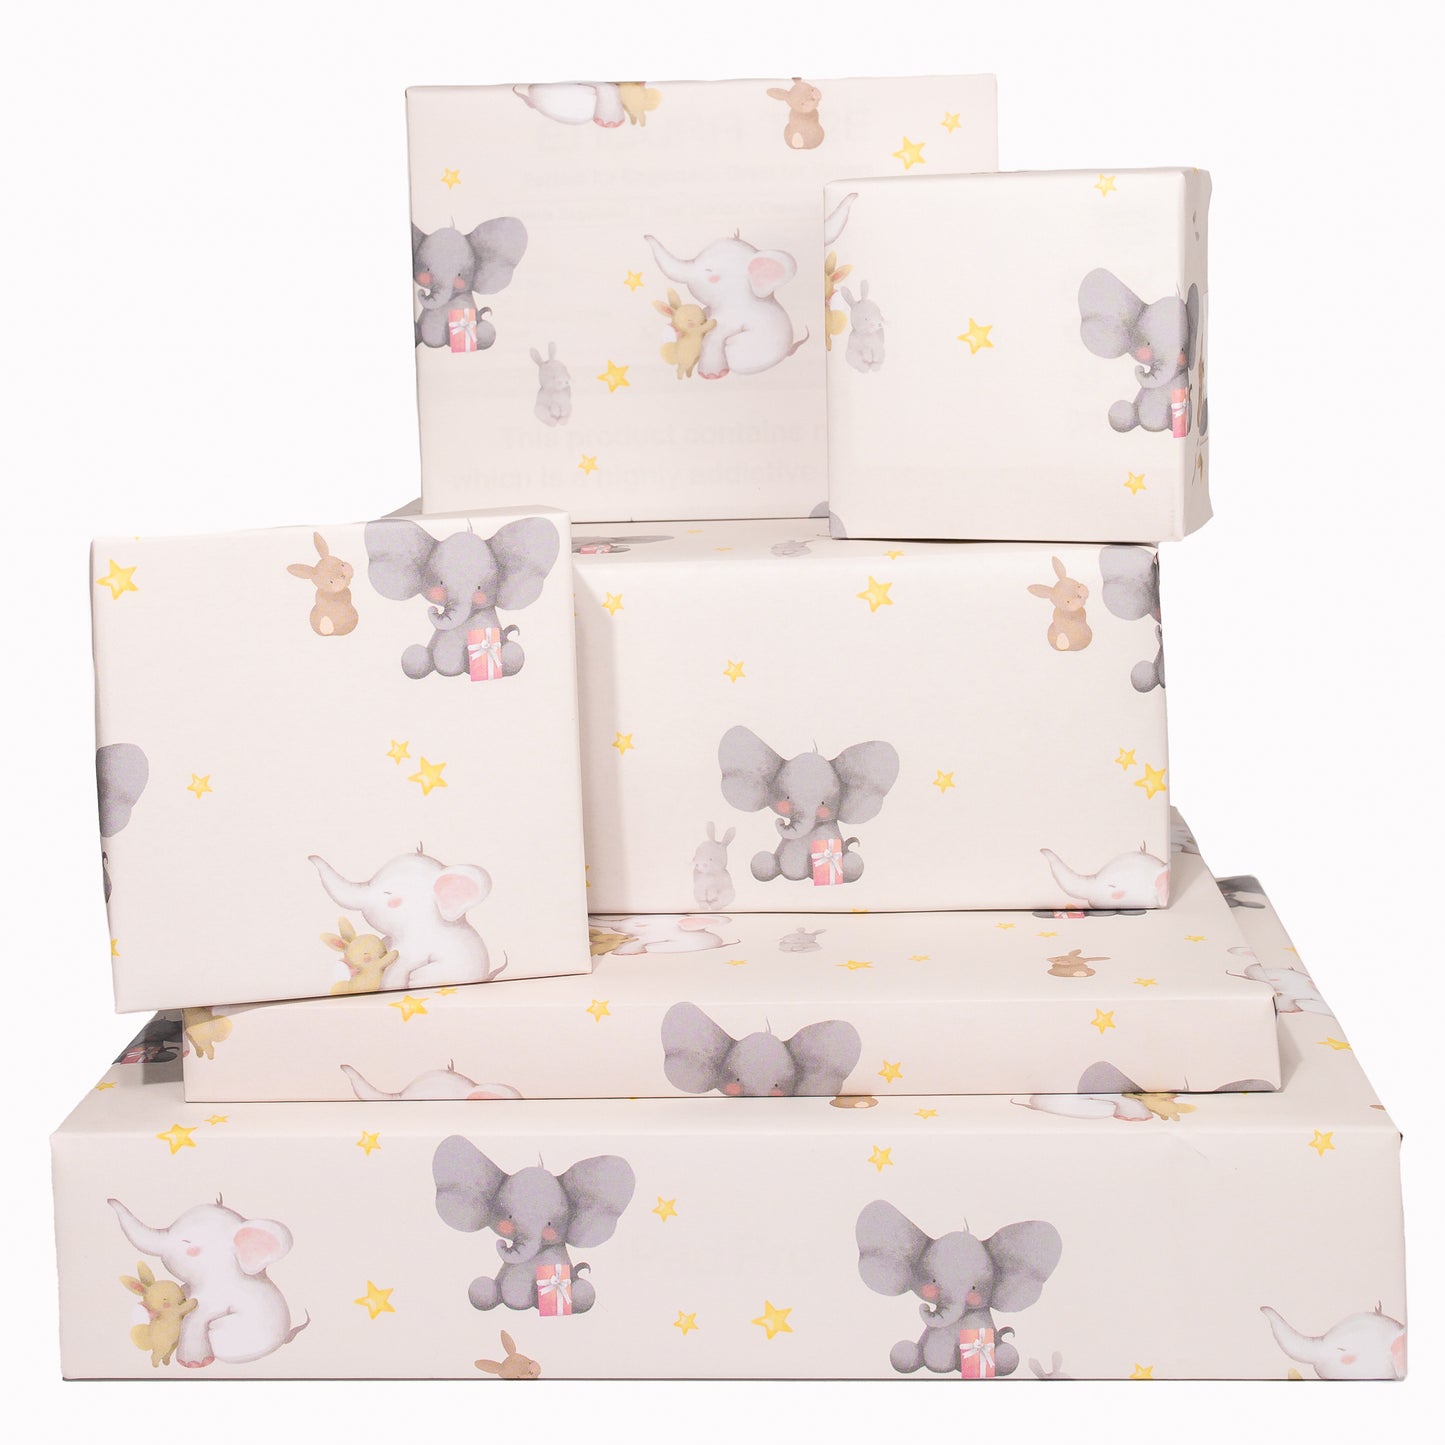 Elephants and Bunnies Wrapping Paper - 6 Sheets of Gift Wrap - 'Elephants and Bunnies' - Pink Gift Wrap - For Boys Girls Baby Kids